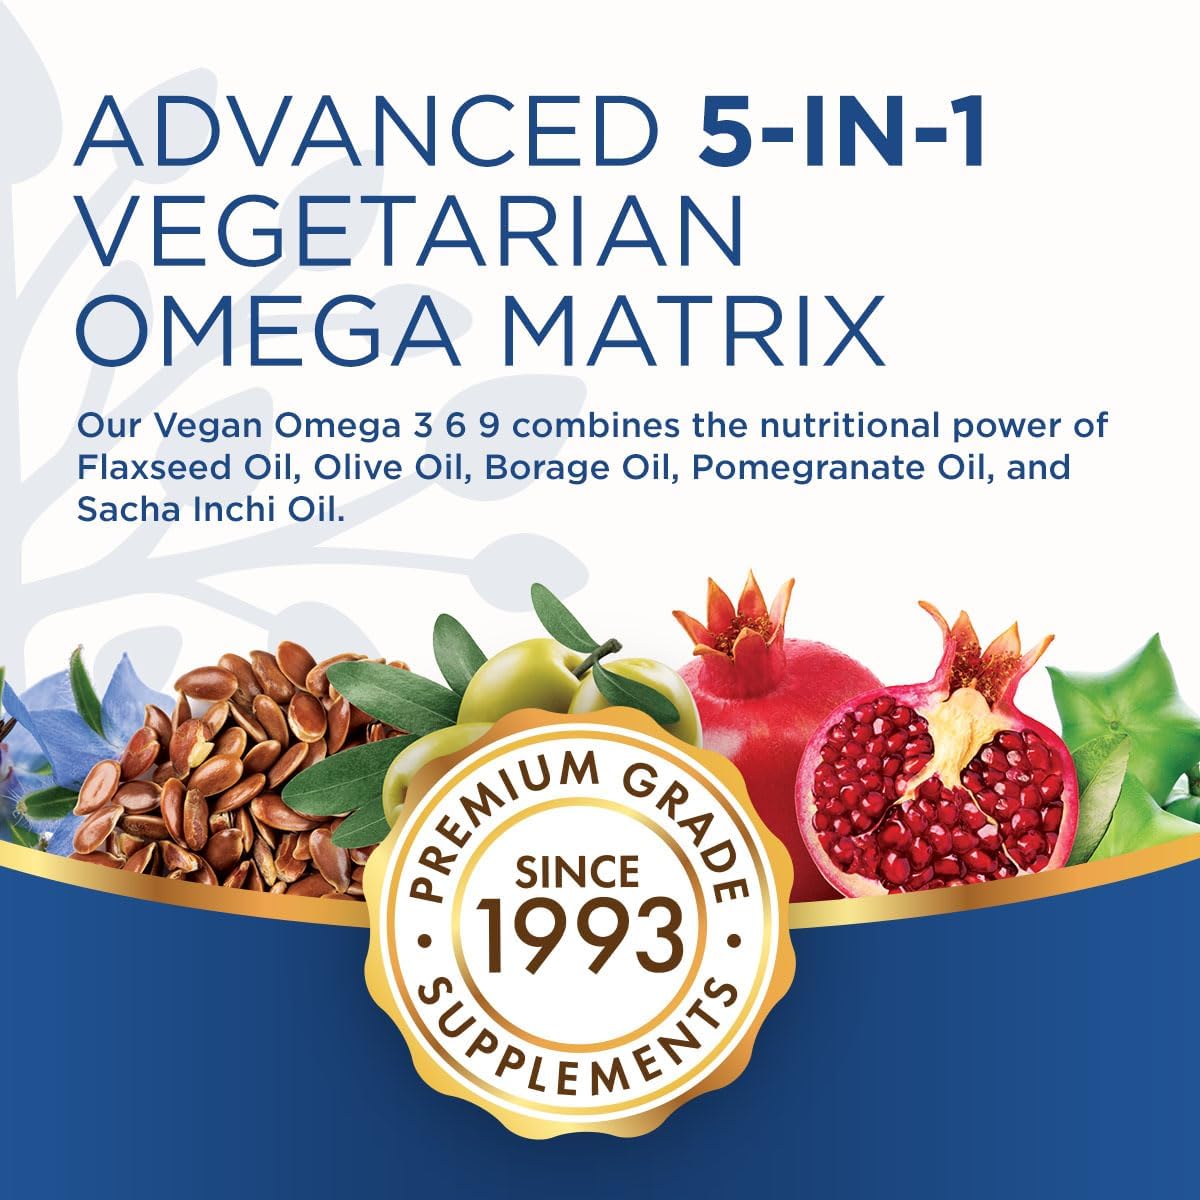 Purity Products Omega 3-6-9 Vegan and Vegetarian Omega Formula - “5 in 1” Essential Fatty Acid Complex - Scientifically Formulated Plant-Based Omega 3 6 9 Essential Fatty Acids (EFA) - from (60) : Health & Household